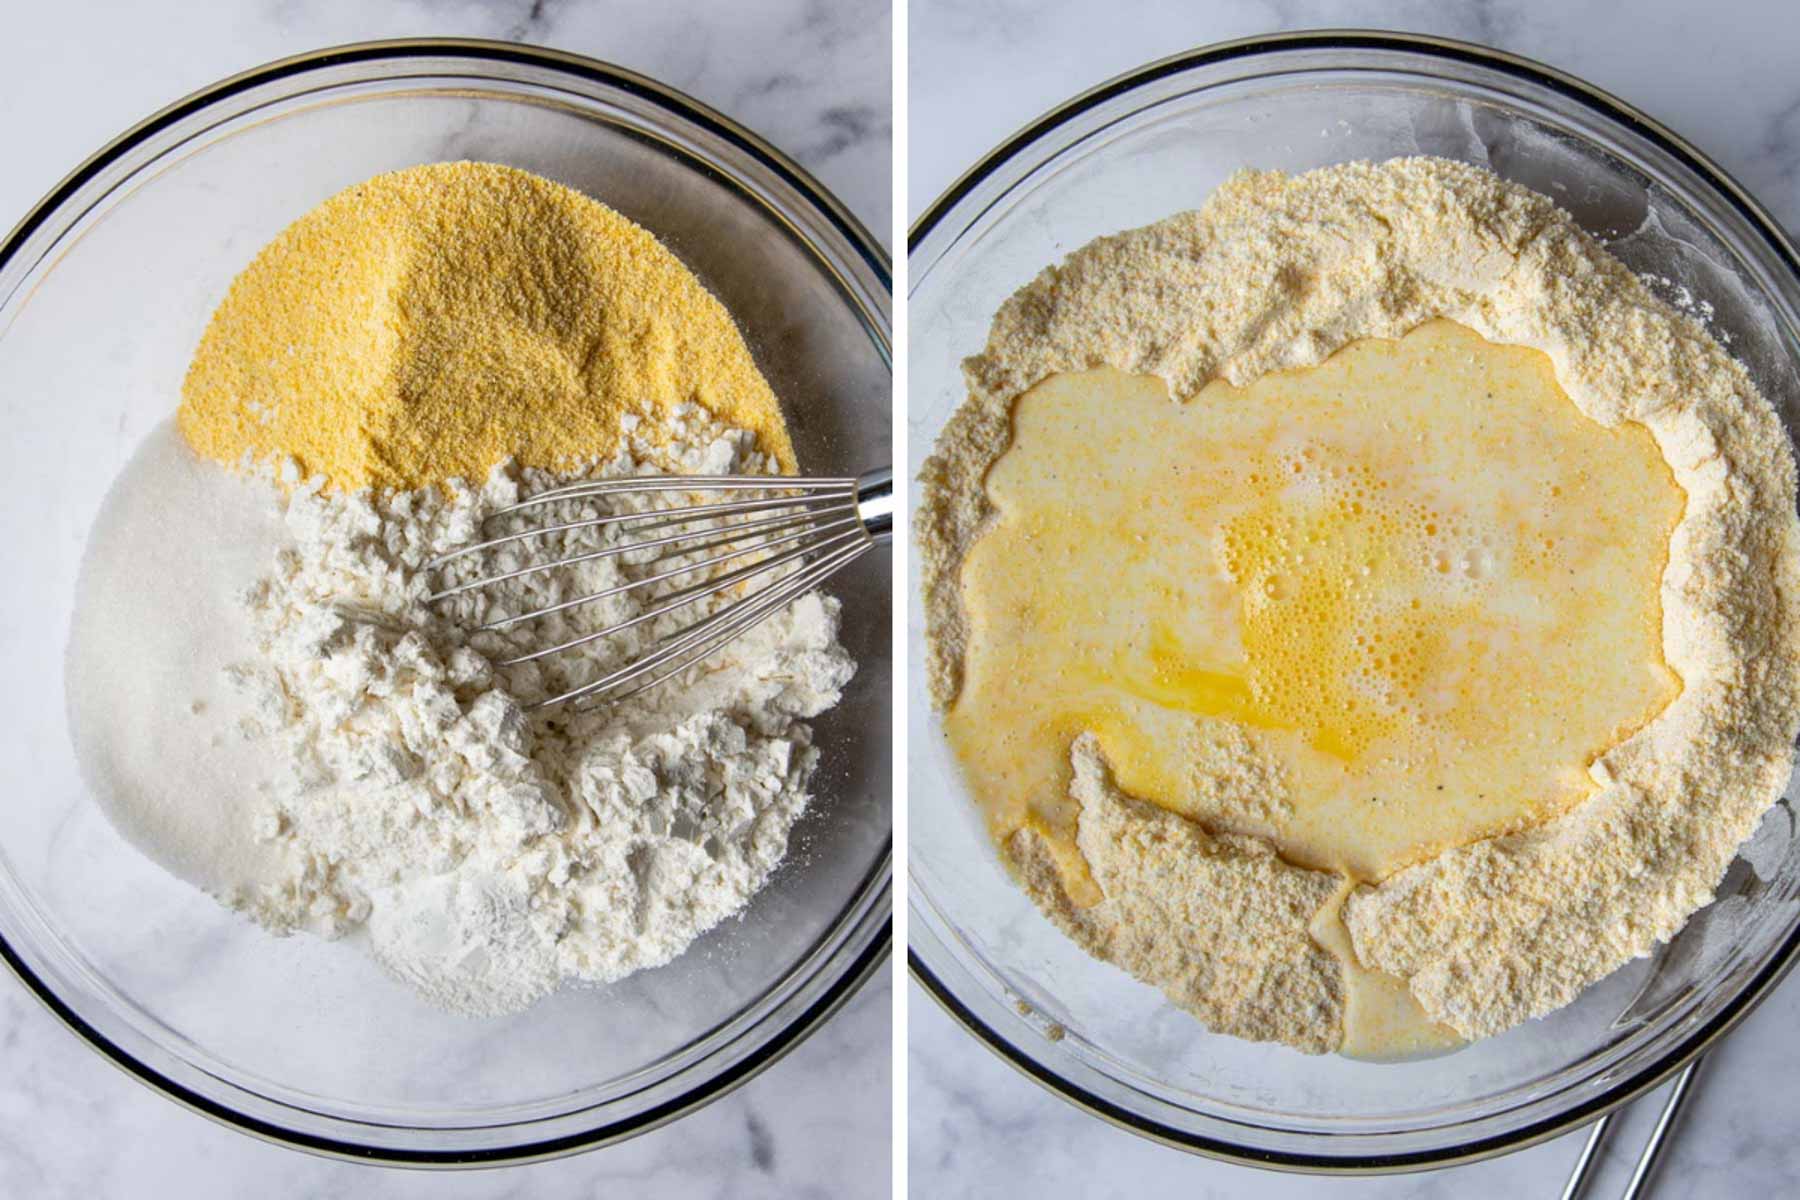 images showing how to make corm muffins batter